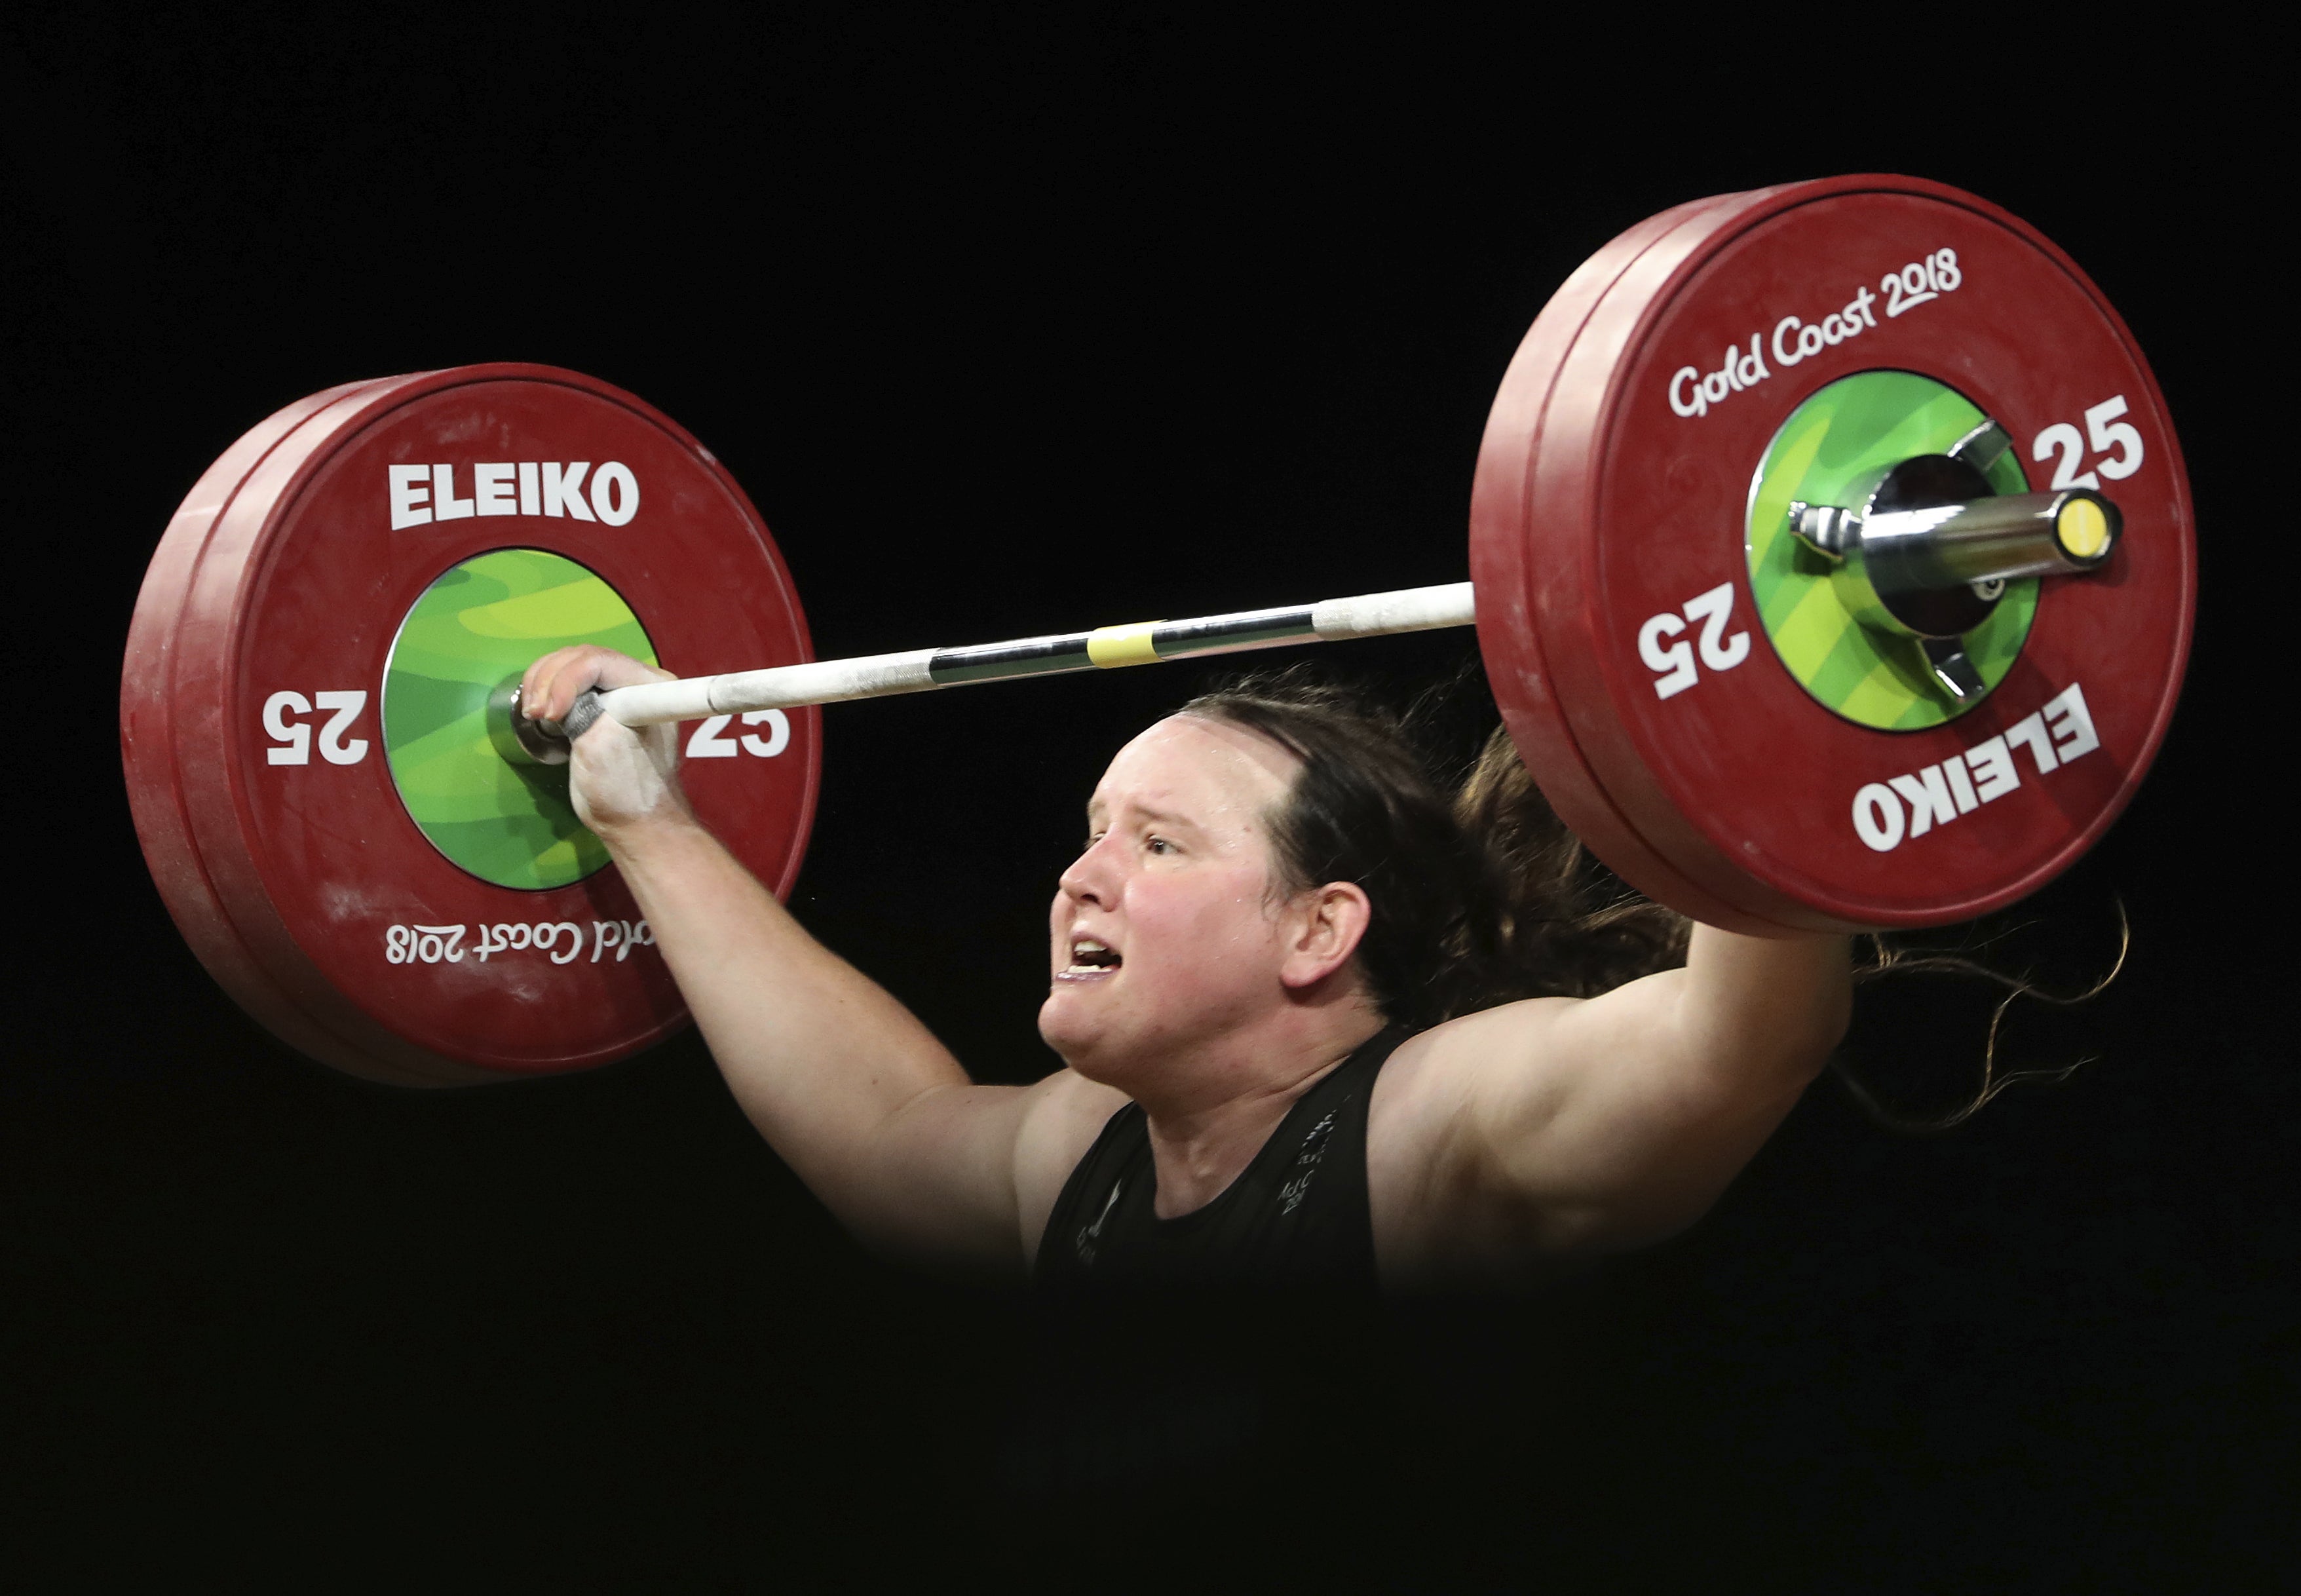 Laurel Hubbard's Olympic selection has sparked controversy